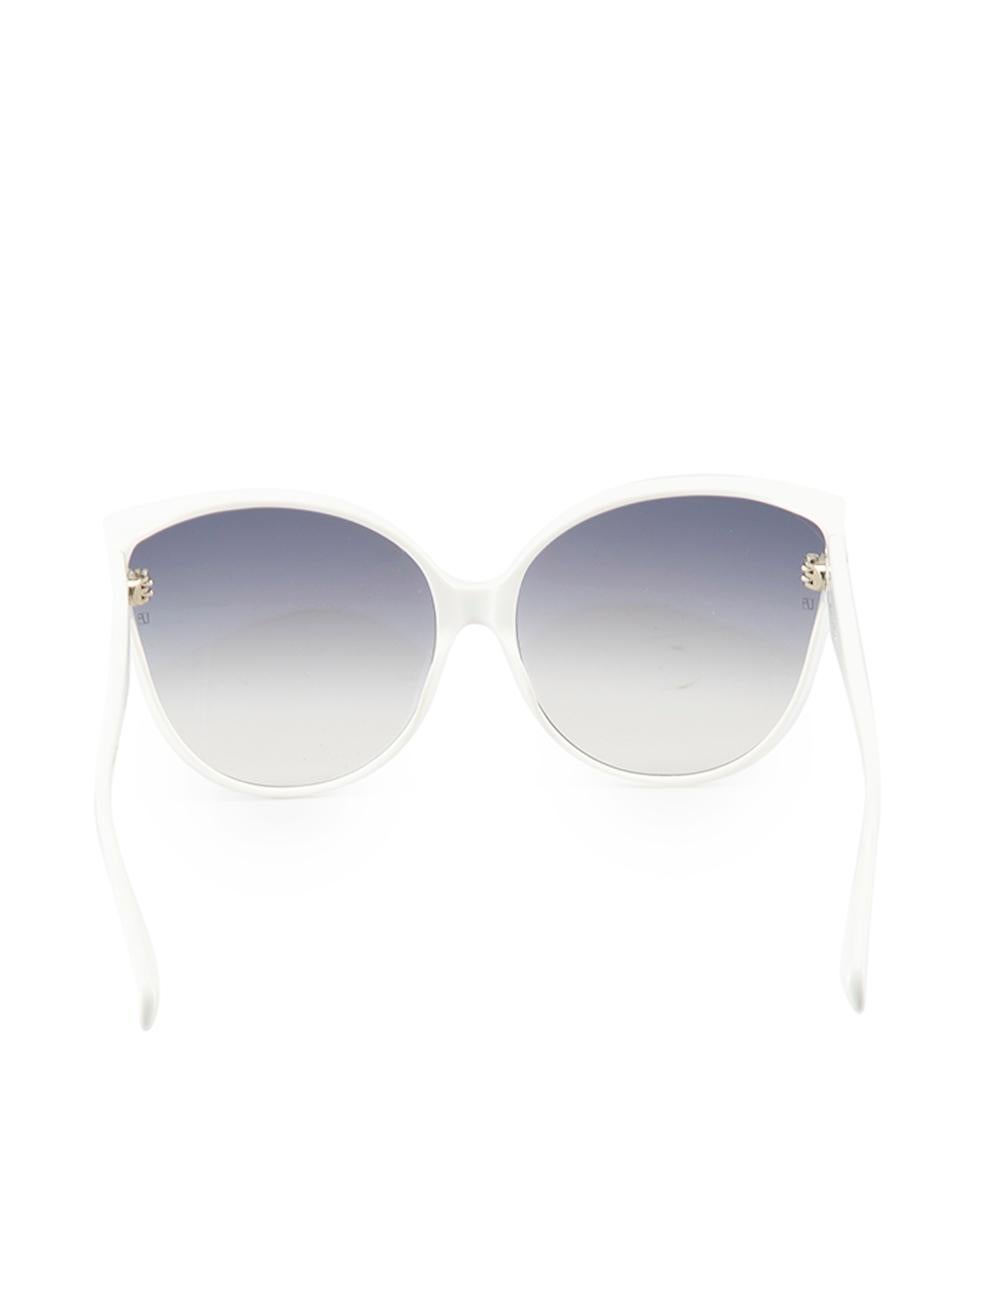 Linda Farrow White Oversized Cat Eye Sunglasses In Excellent Condition For Sale In London, GB